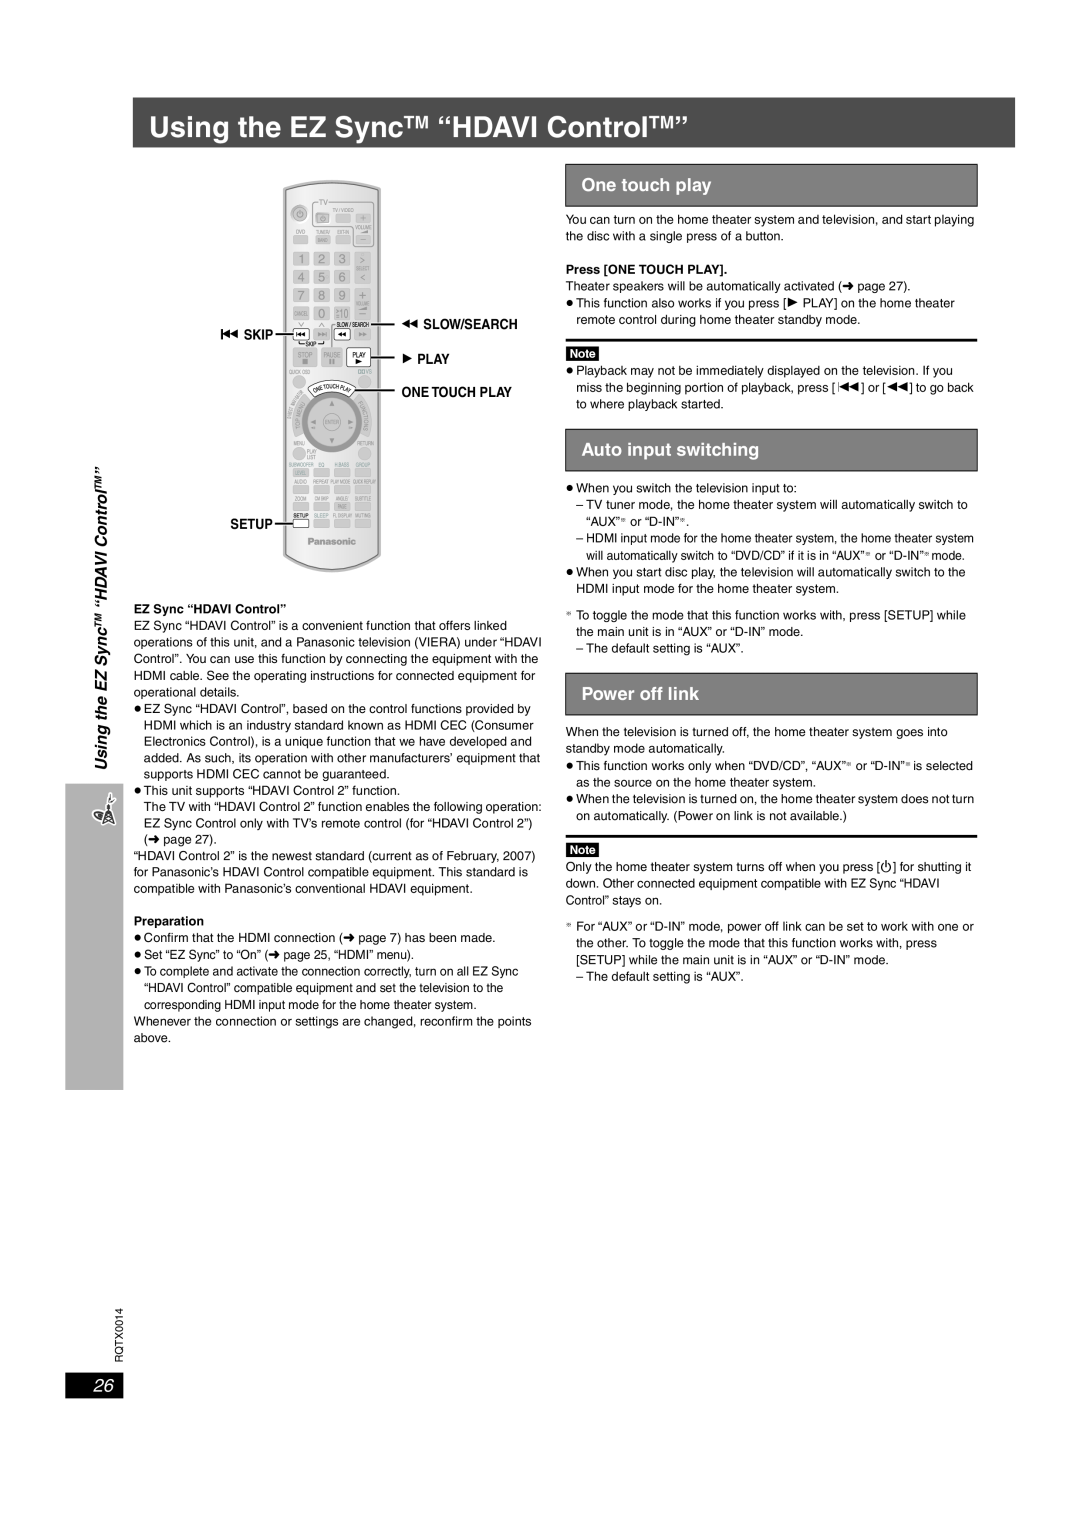 Panasonic SC-PTX5 manual Using the EZ SyncTM “HDAVI ControlTM”, One touch play, Auto input switching, Power off link, Setup 